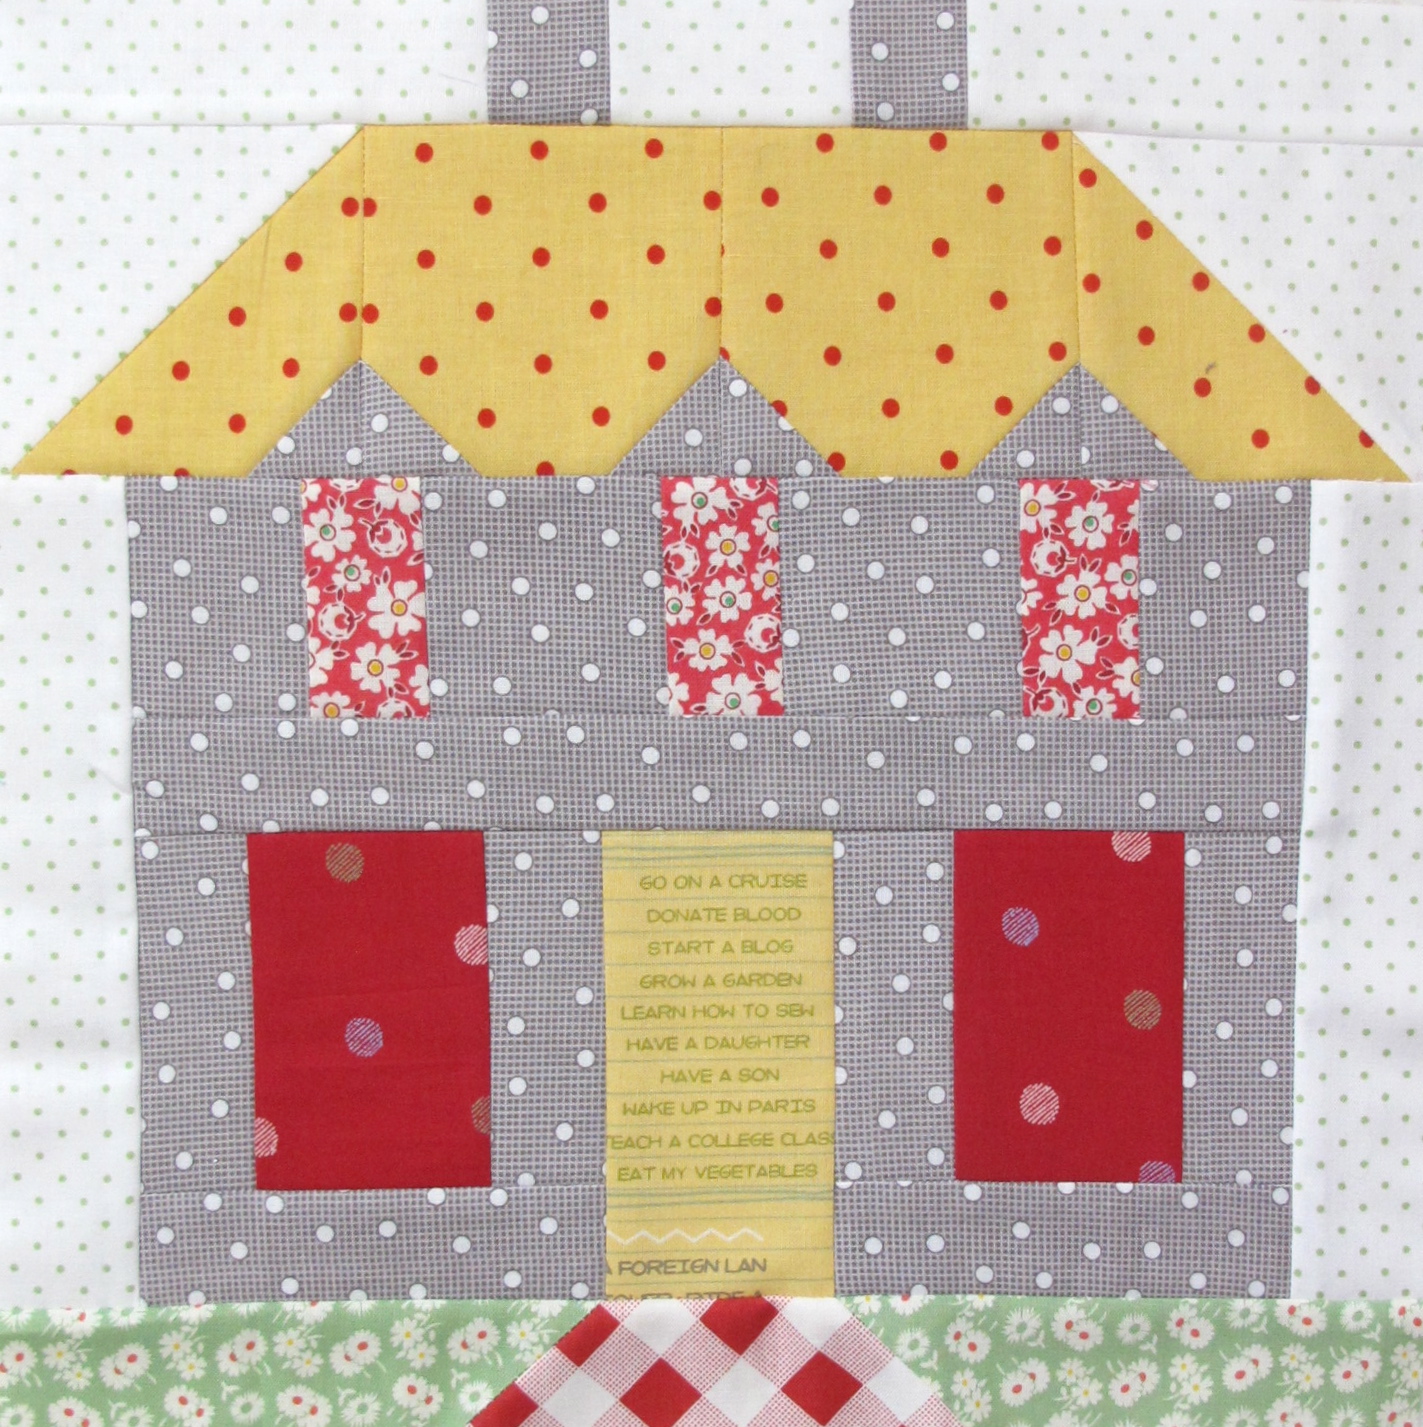 Bee In My Bonnet: My Home Sweet Home Quilt Block Pattern - In